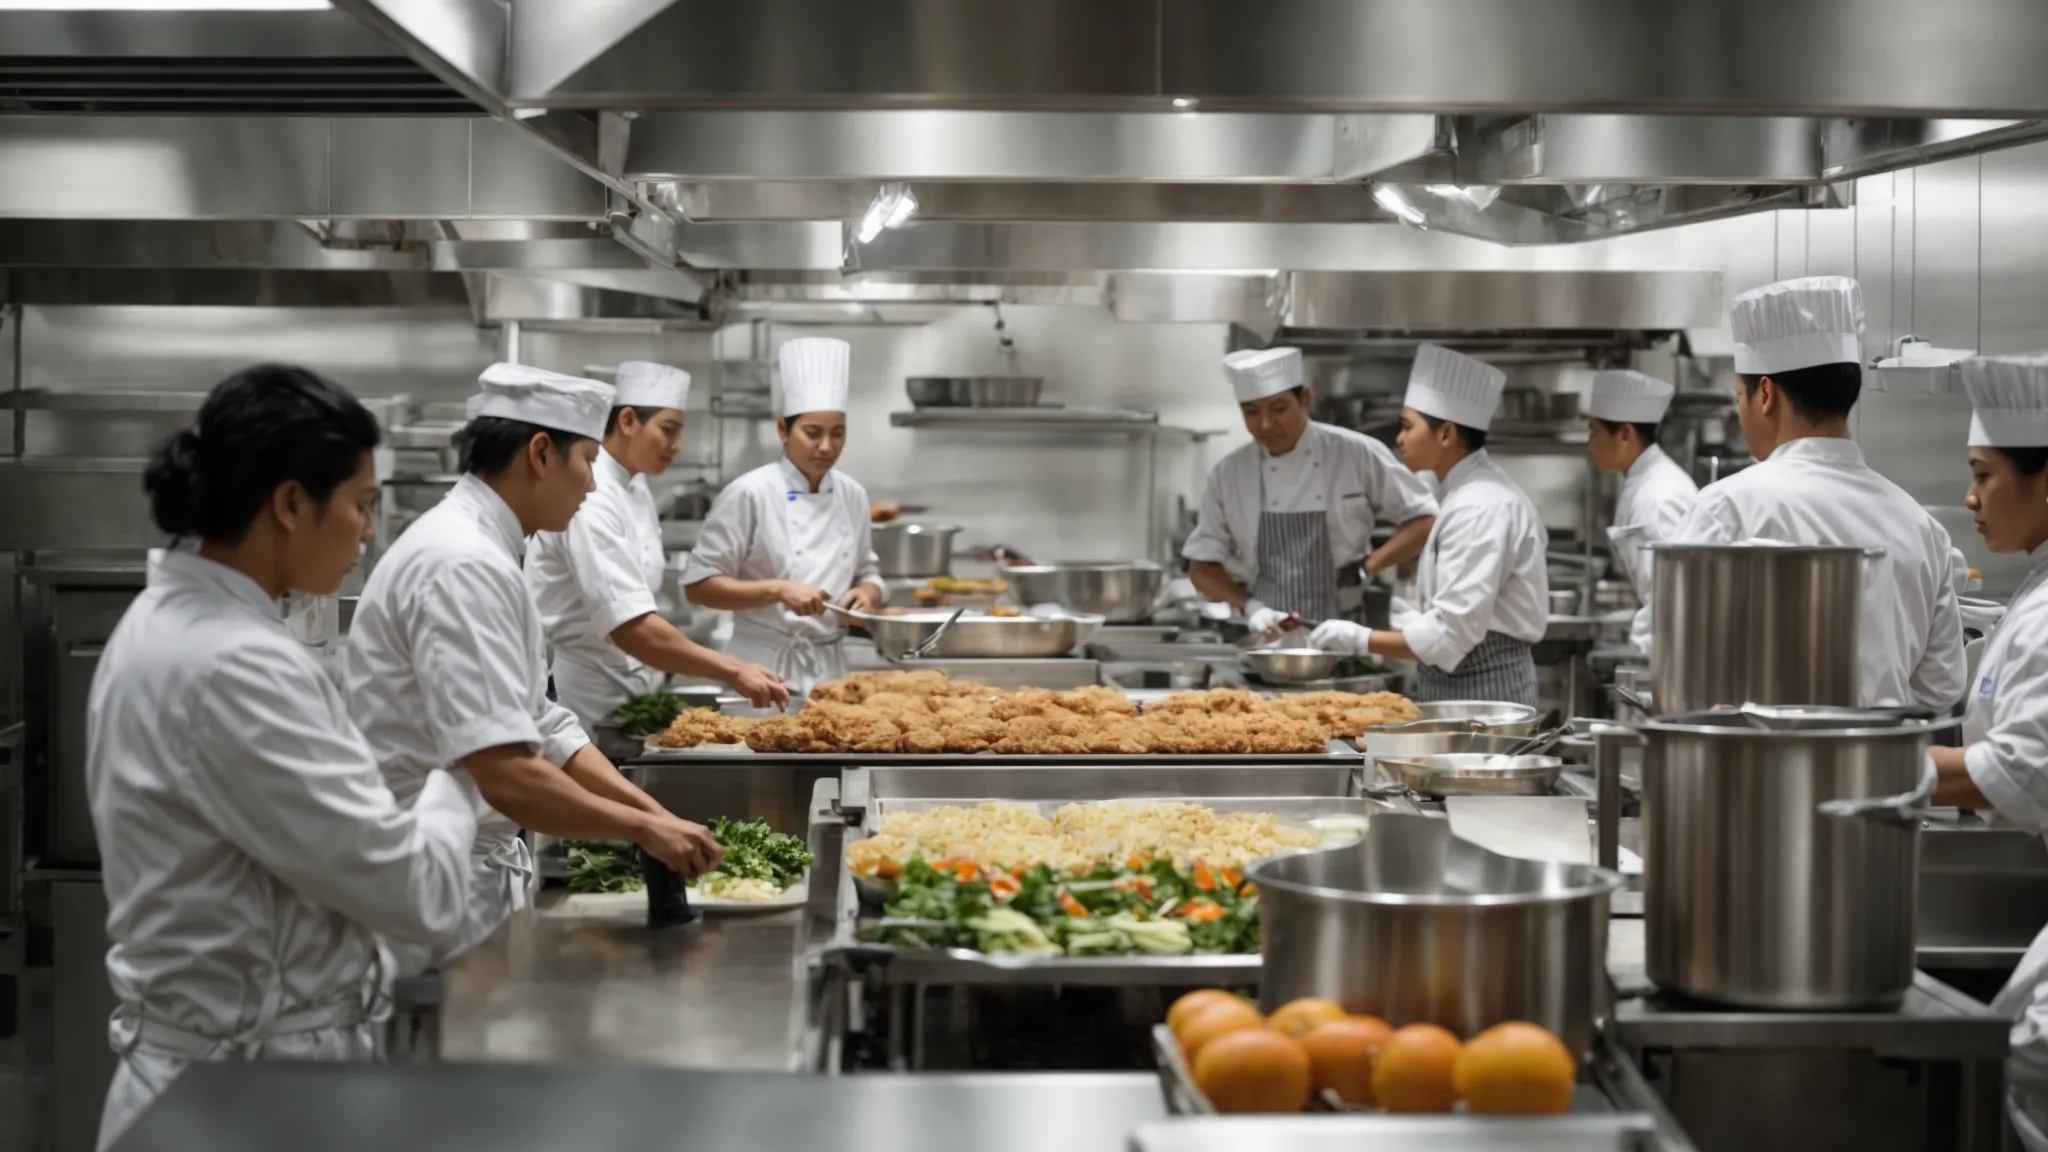 a bustling commercial kitchen with clear air and active cooks, highlighting an efficient, clean environment.